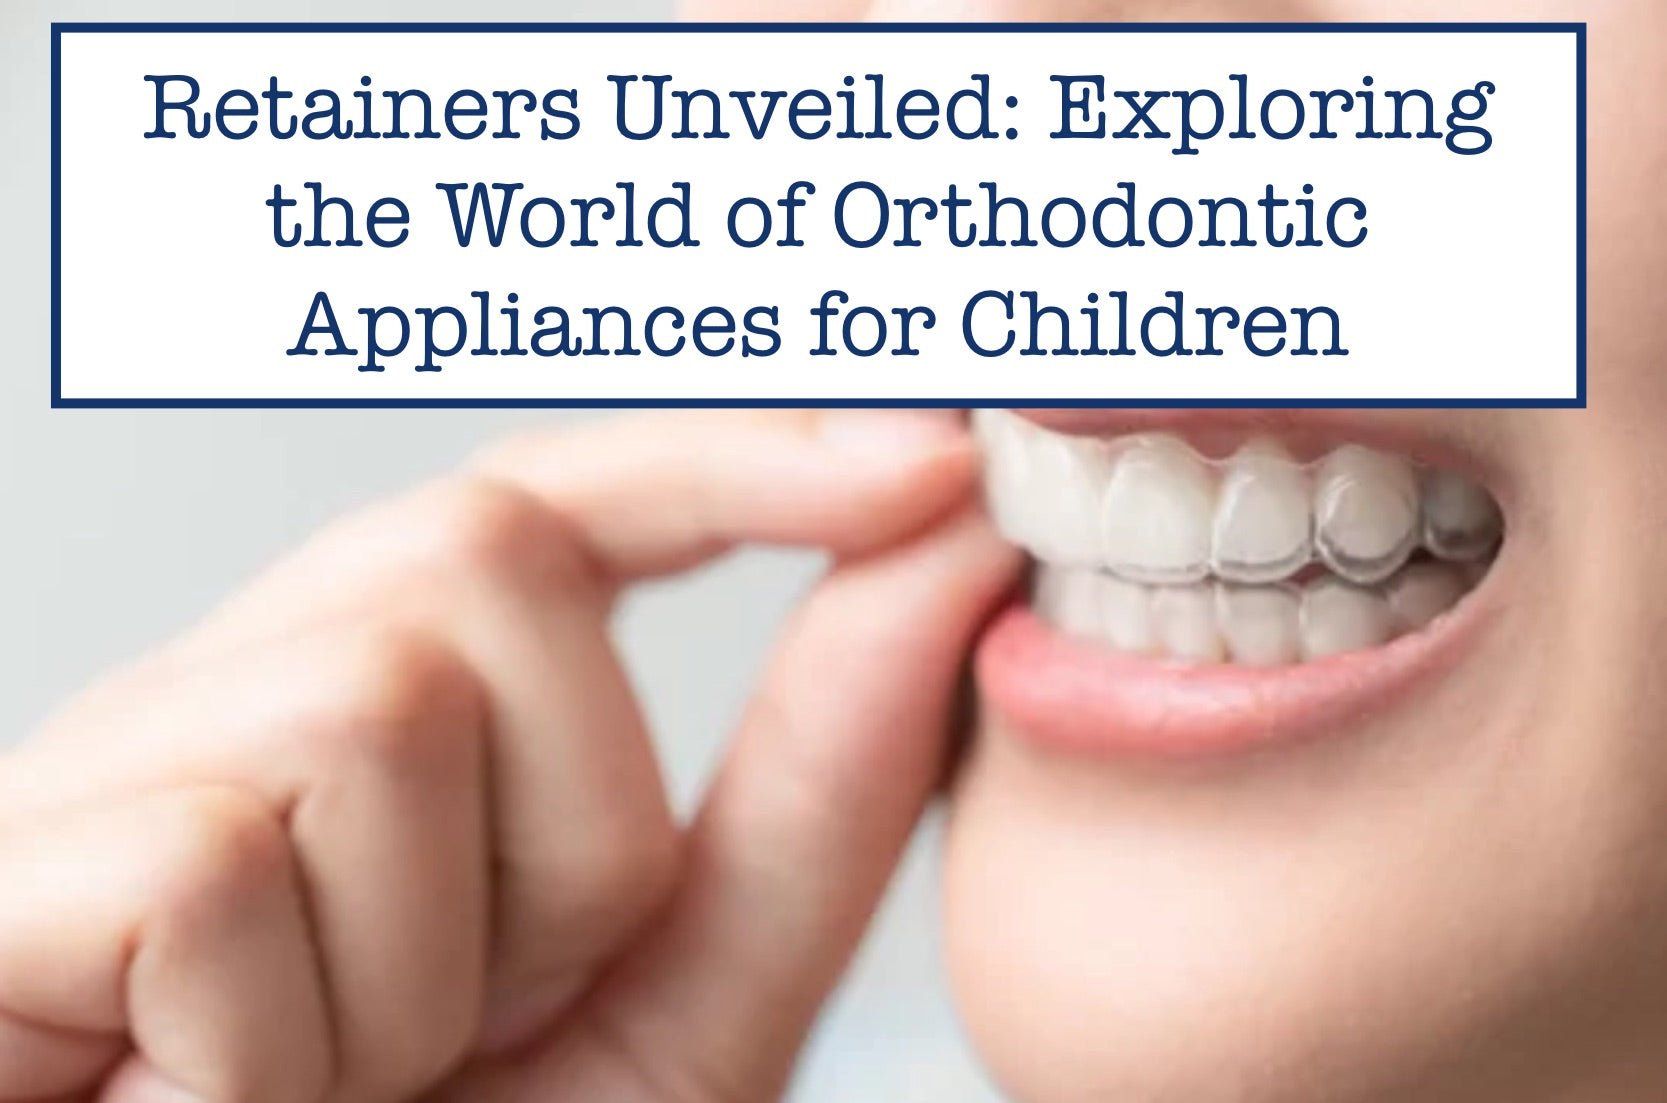 Retainers Unveiled: Exploring the World of Orthodontic Appliances for Children